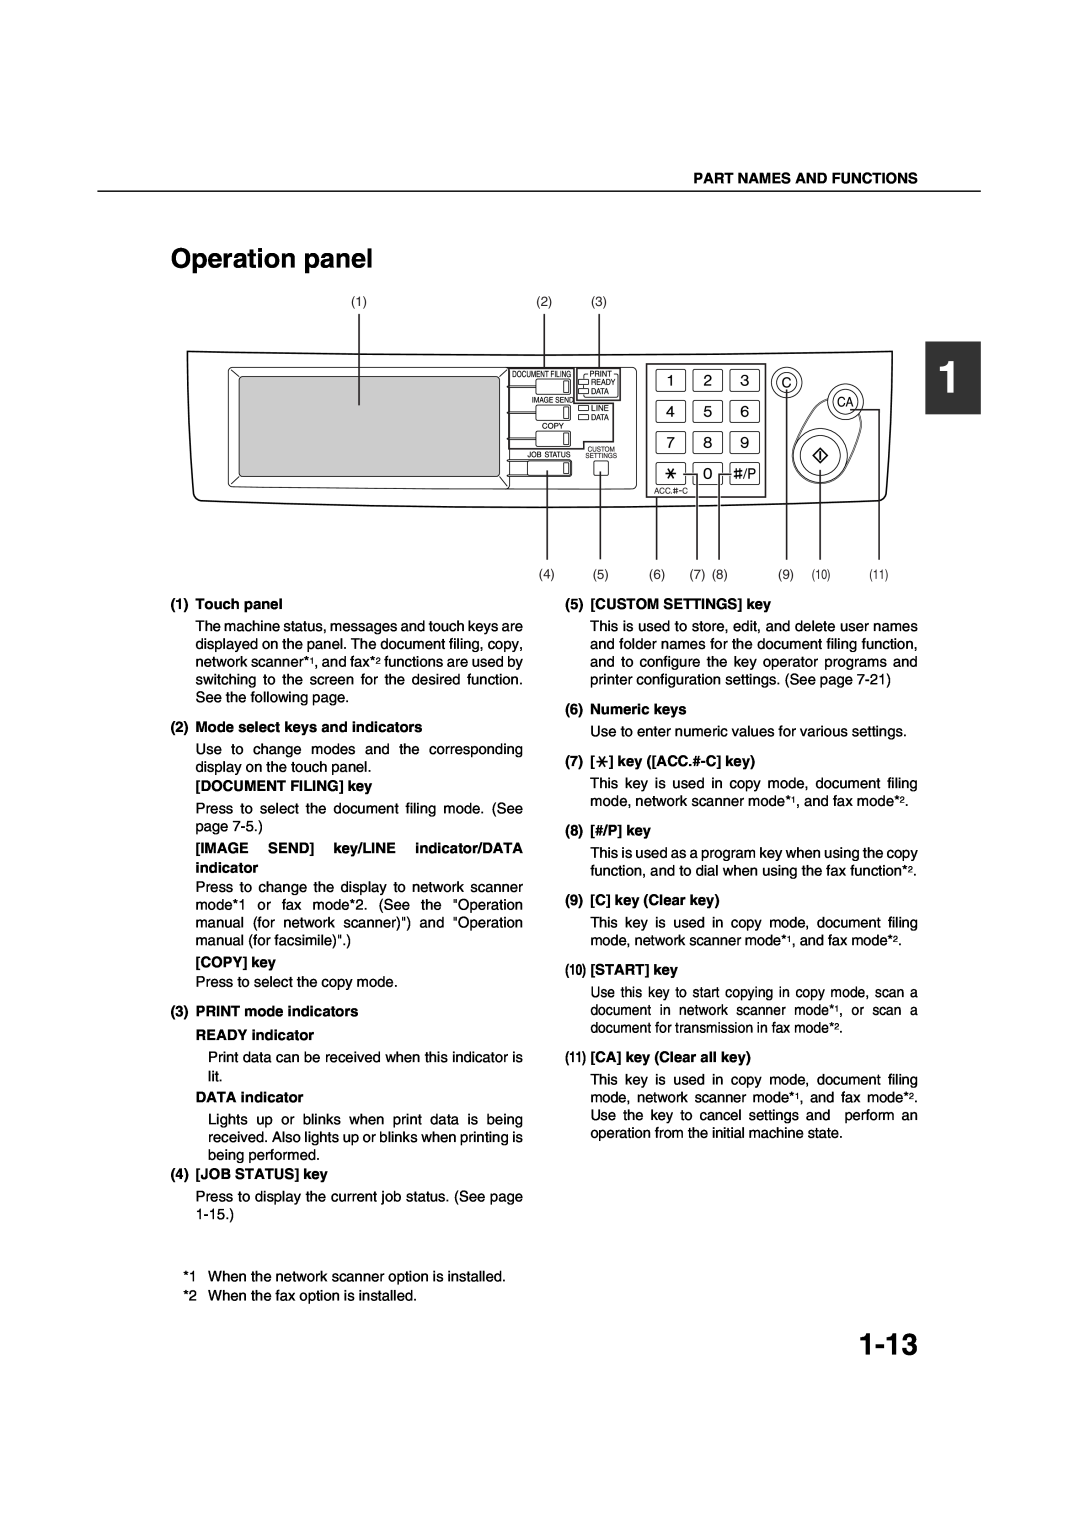 Sharp AR-M451N 1-13, Operation panel, Part Names And Functions, Touch panel, CUSTOM SETTINGS key, DOCUMENT FILING key 